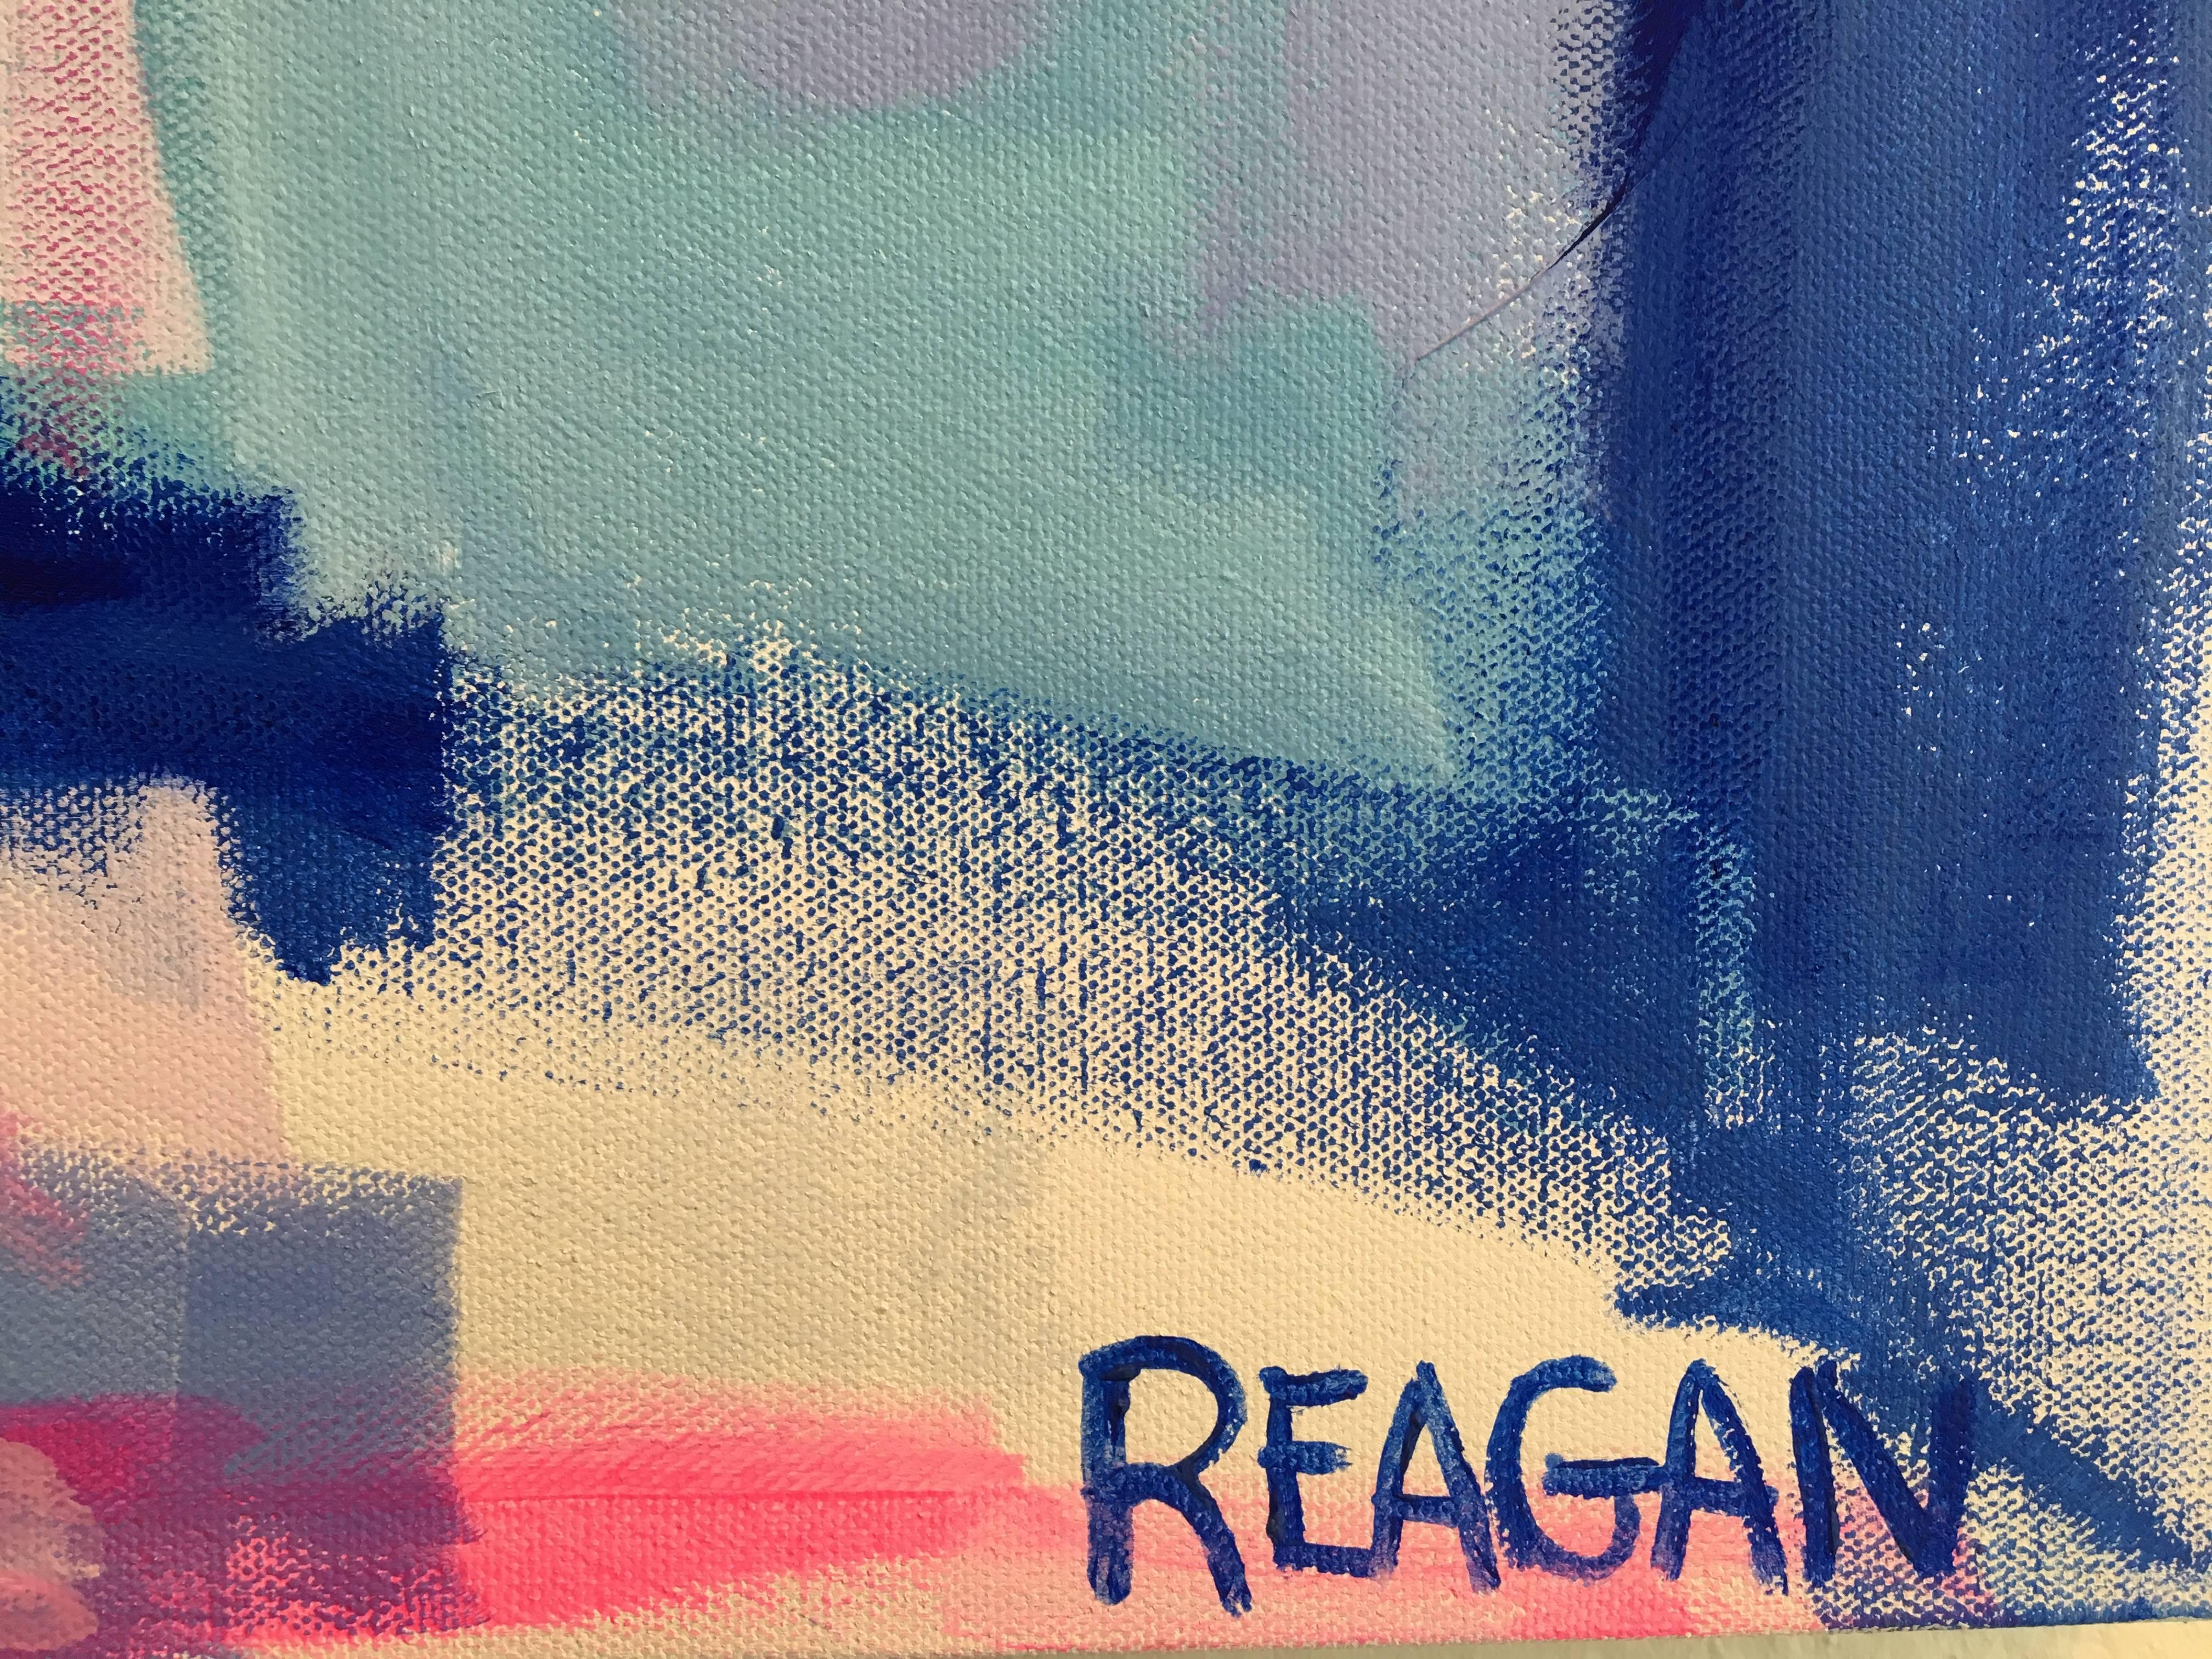 My Summer House in ACK - Gray Abstract Painting by Reagan Geschardt